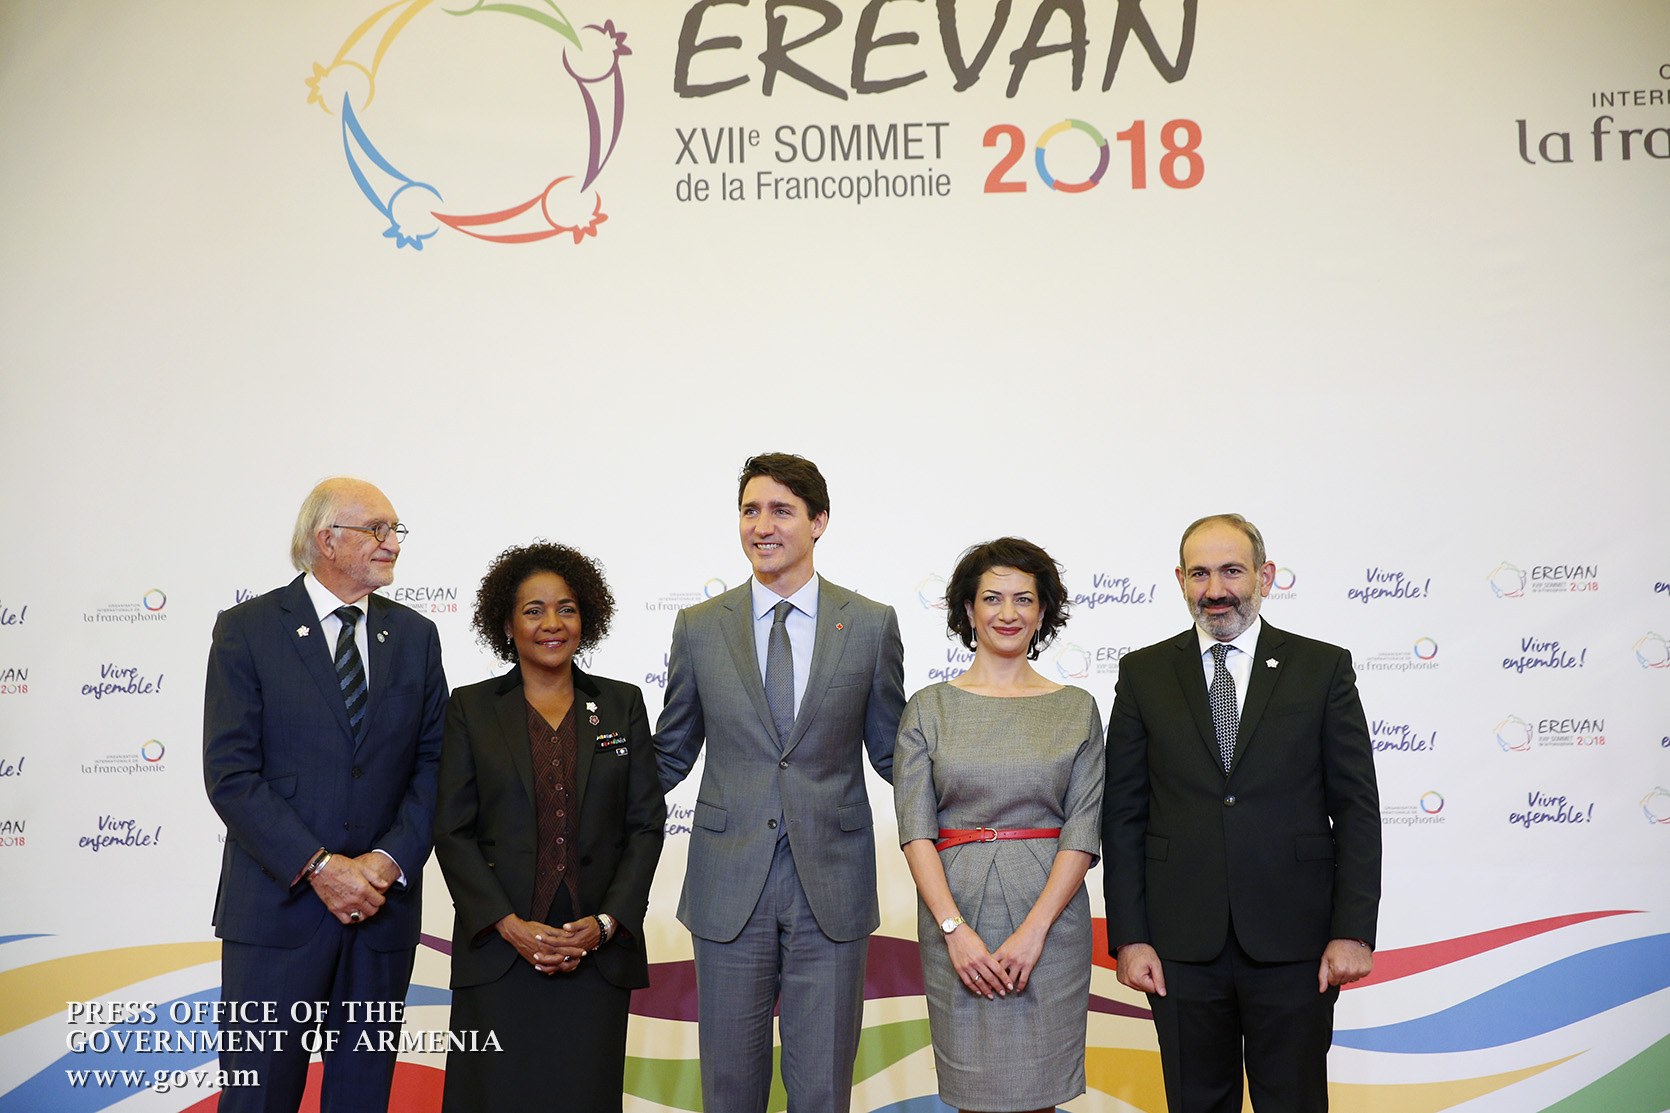 PM welcomes participants of 17th Summit of La Francophonie